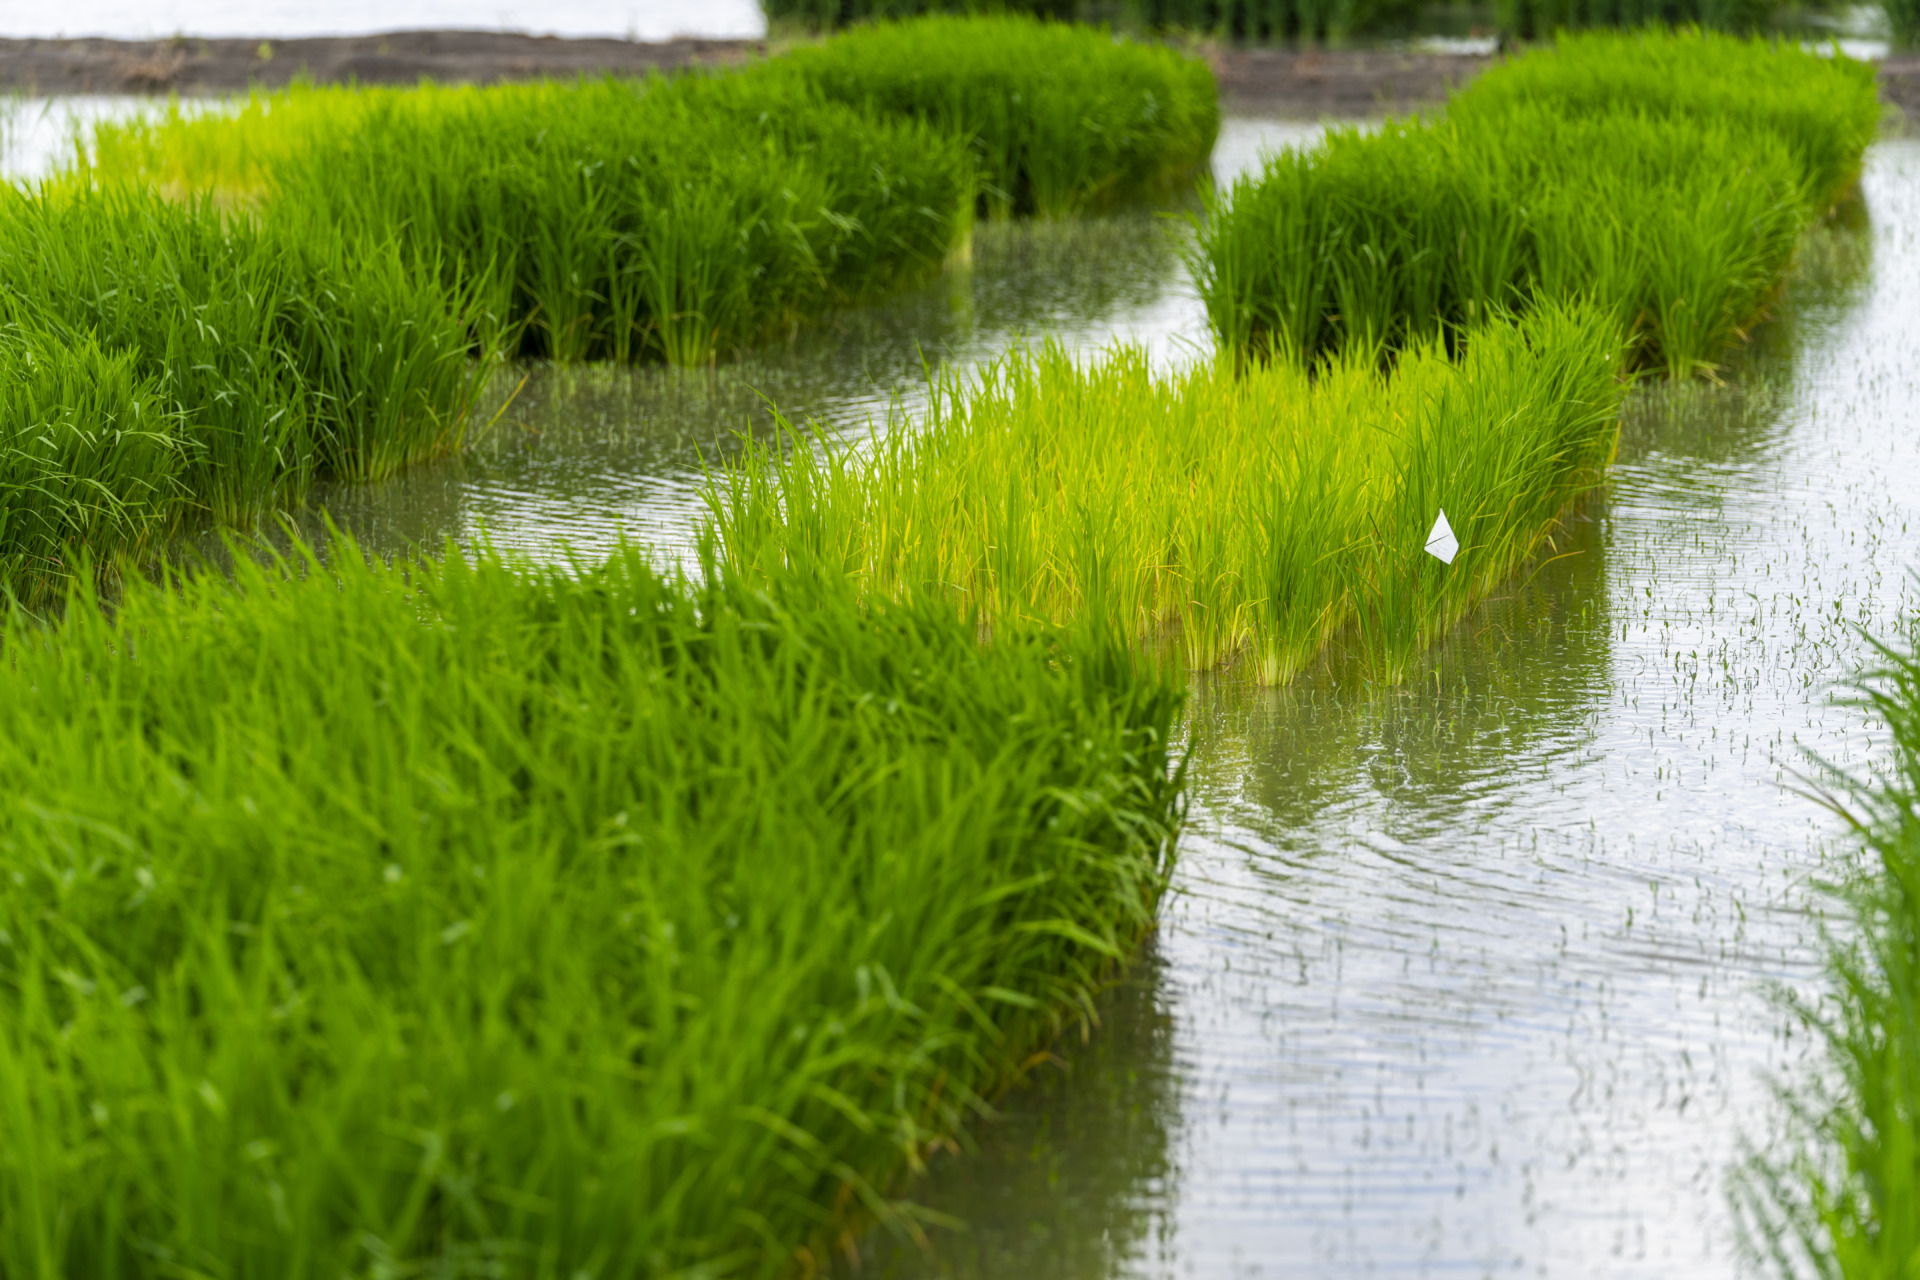 Finding the ‘goldilocks’ zone or conditions in rice irrigation